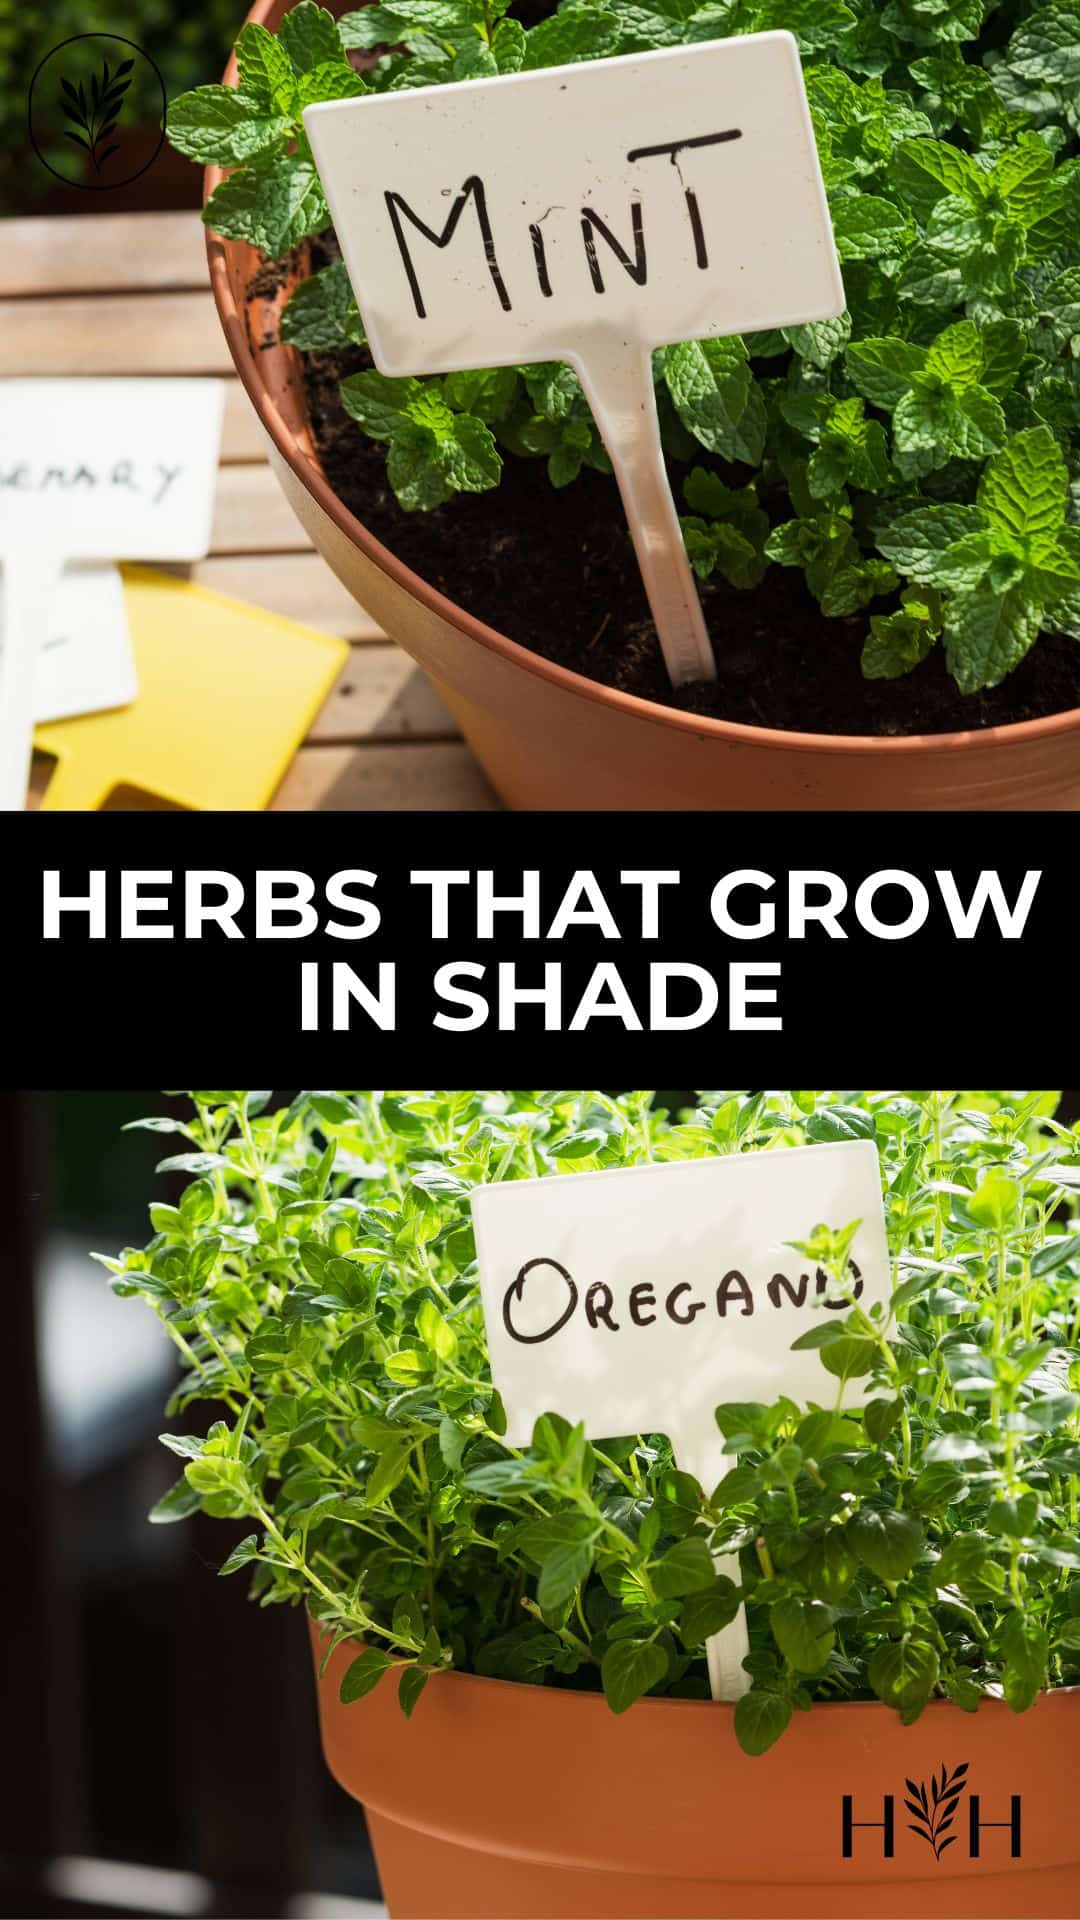 Herbs that grow in shade via @home4theharvest